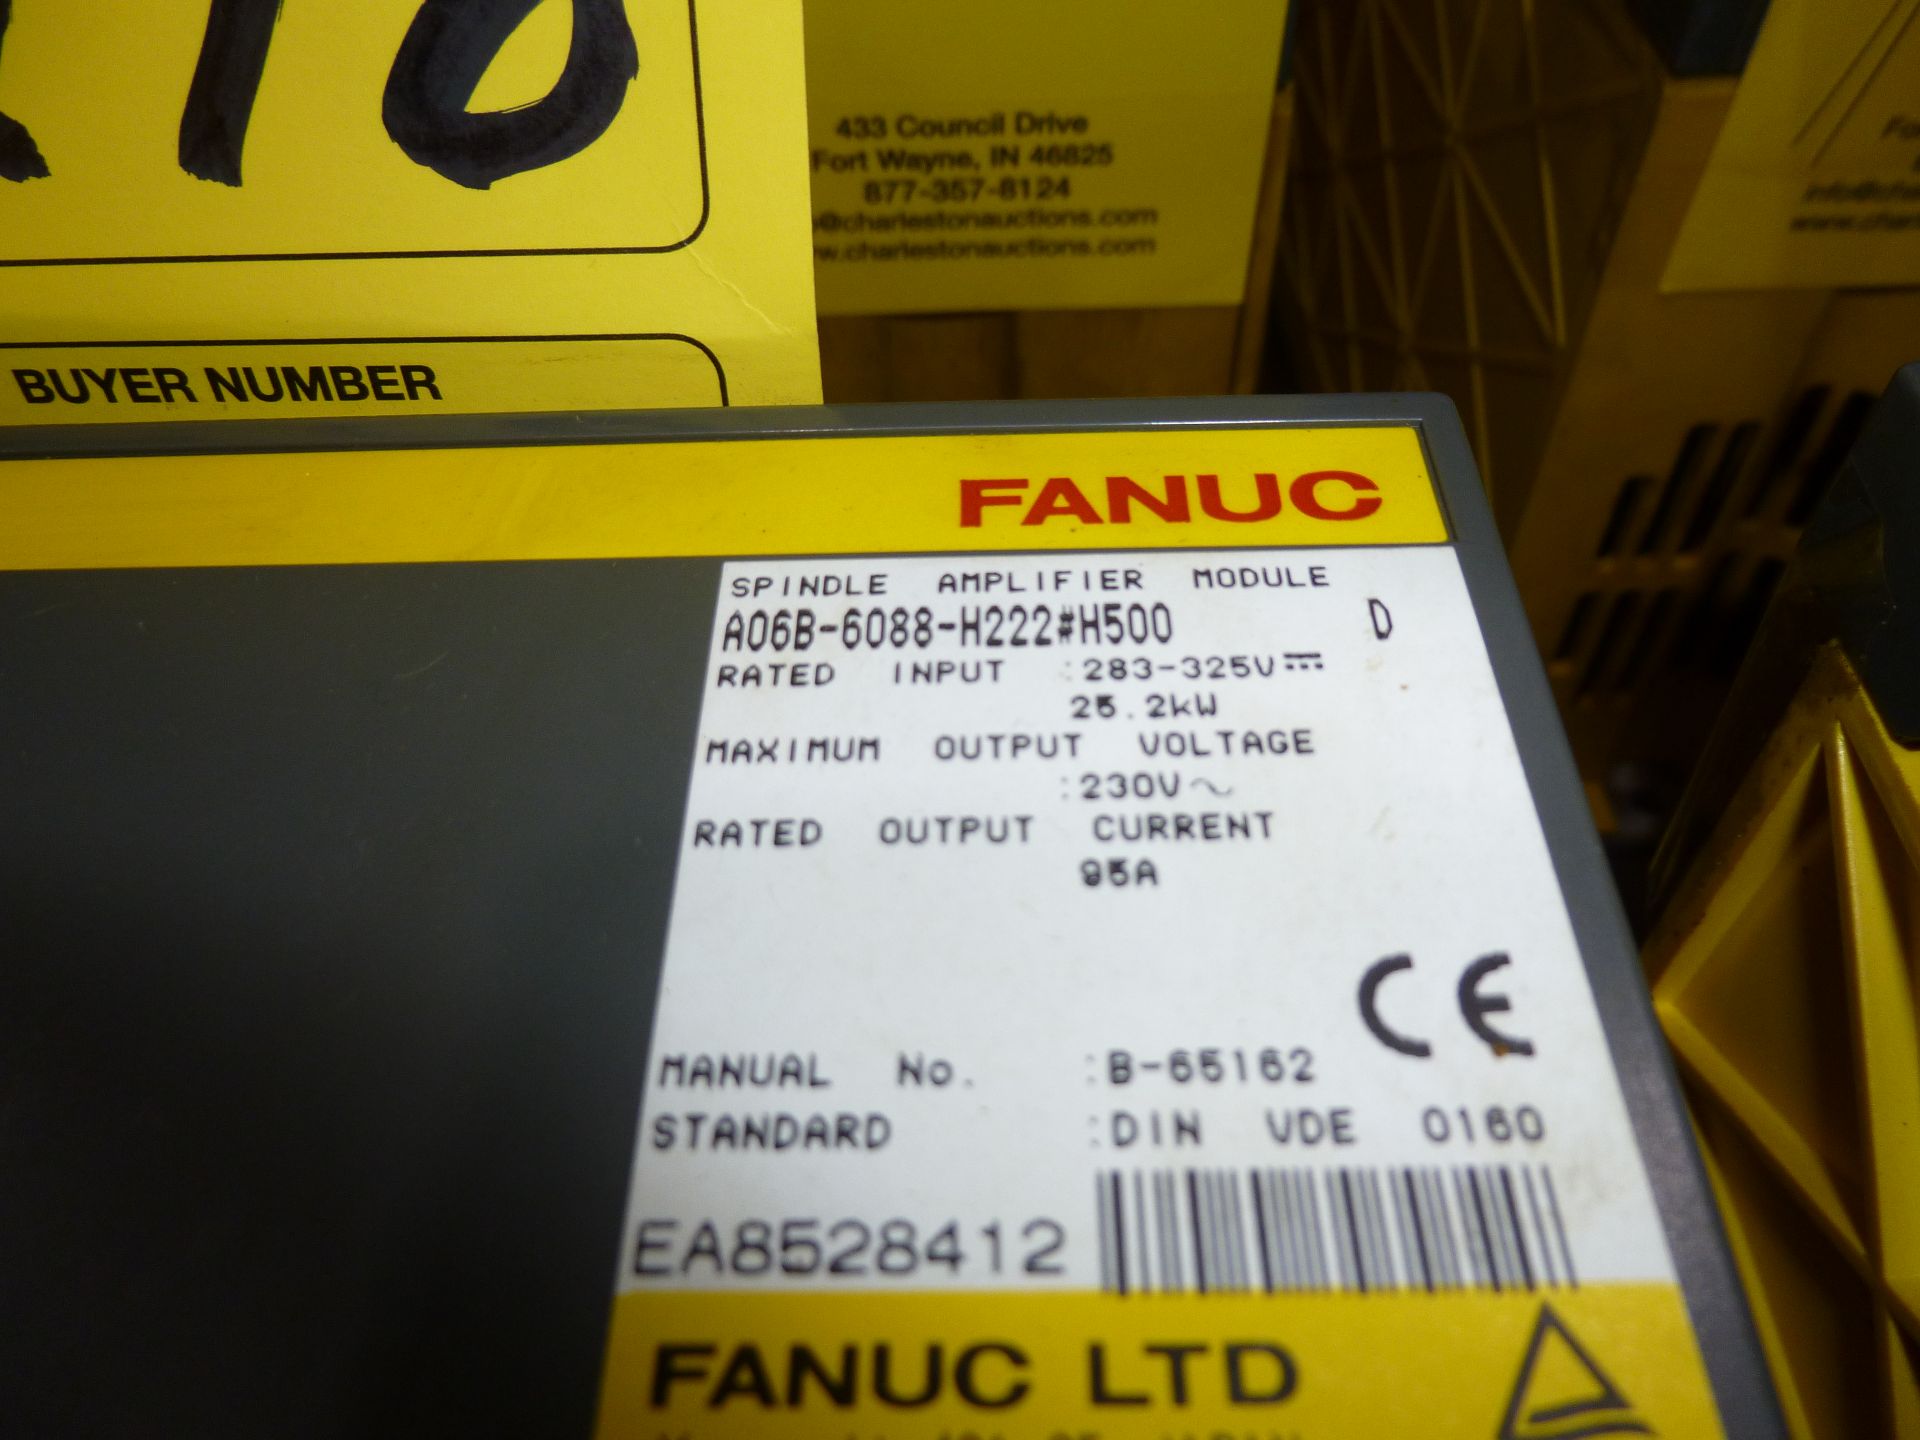 Fanuc spindle amplifier module model A06B-6088-H222 #H500, as always with Brolyn LLC auctions, all - Image 2 of 2